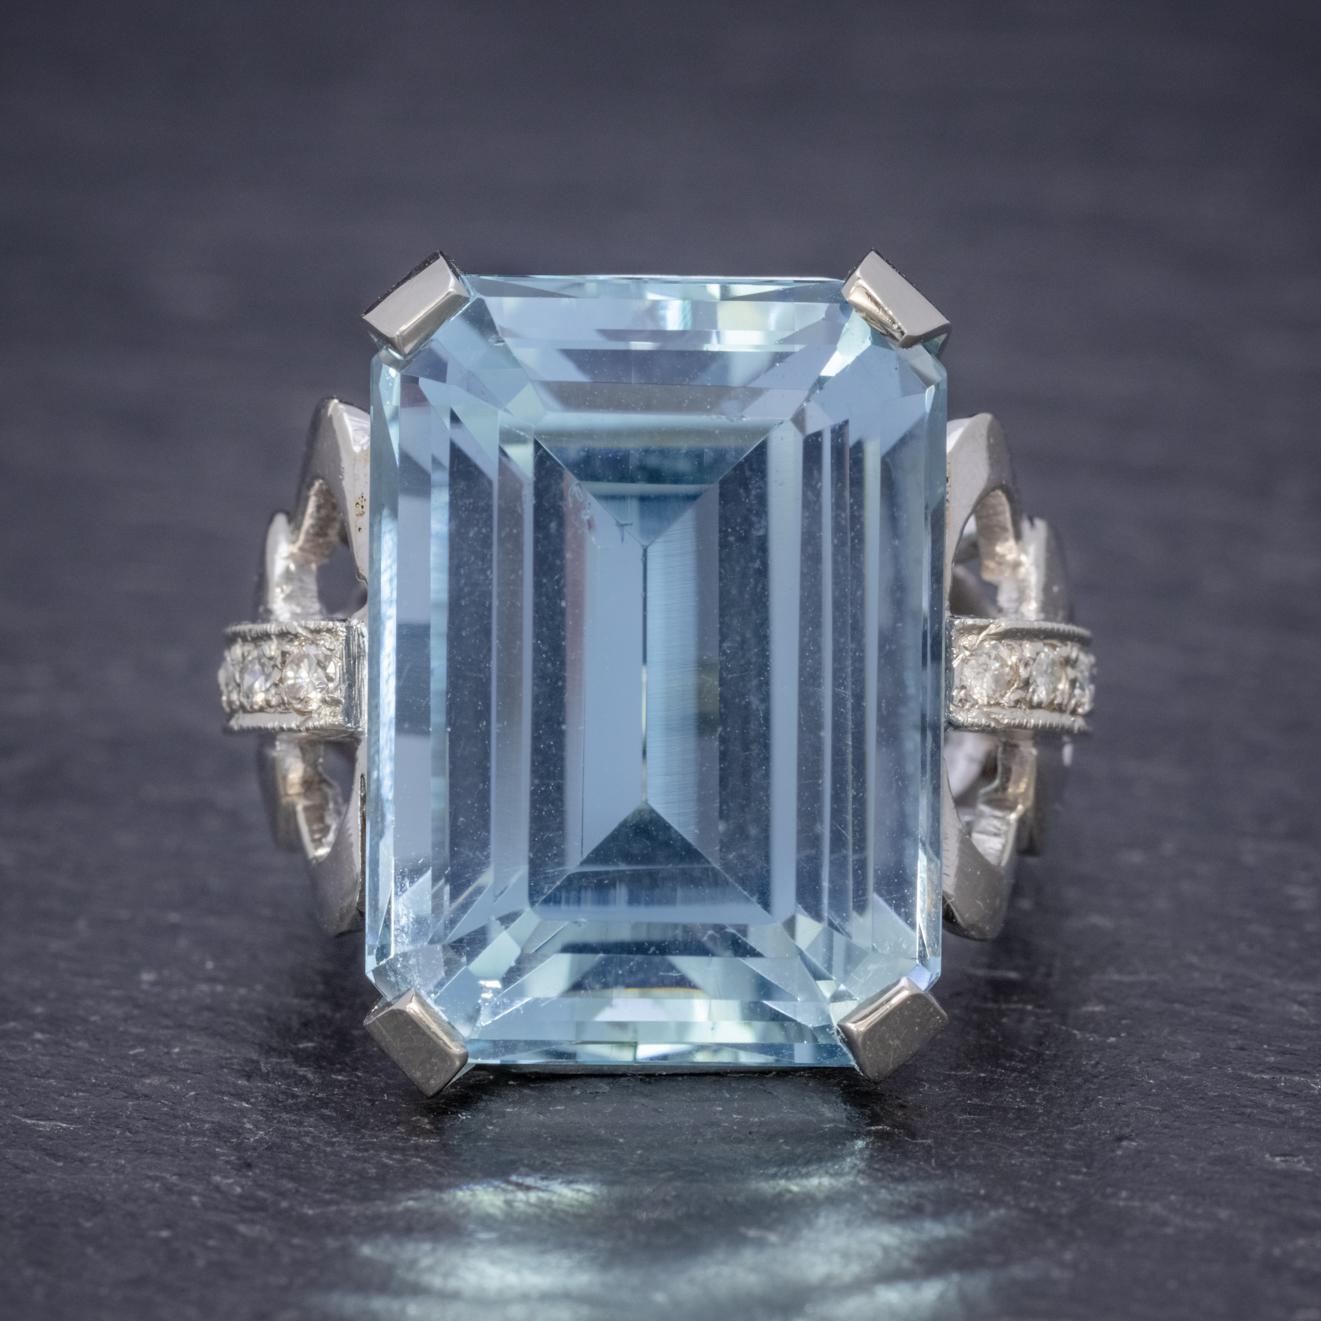 A magnificent Art Deco cocktail ring adorned with a breath-taking emerald cut Aquamarine which is approx. 35ct and a lovely clear ocean blue colour with flashes of inner green. 

The Aqua is claw set in a robust 14ct White Gold gallery with a fancy